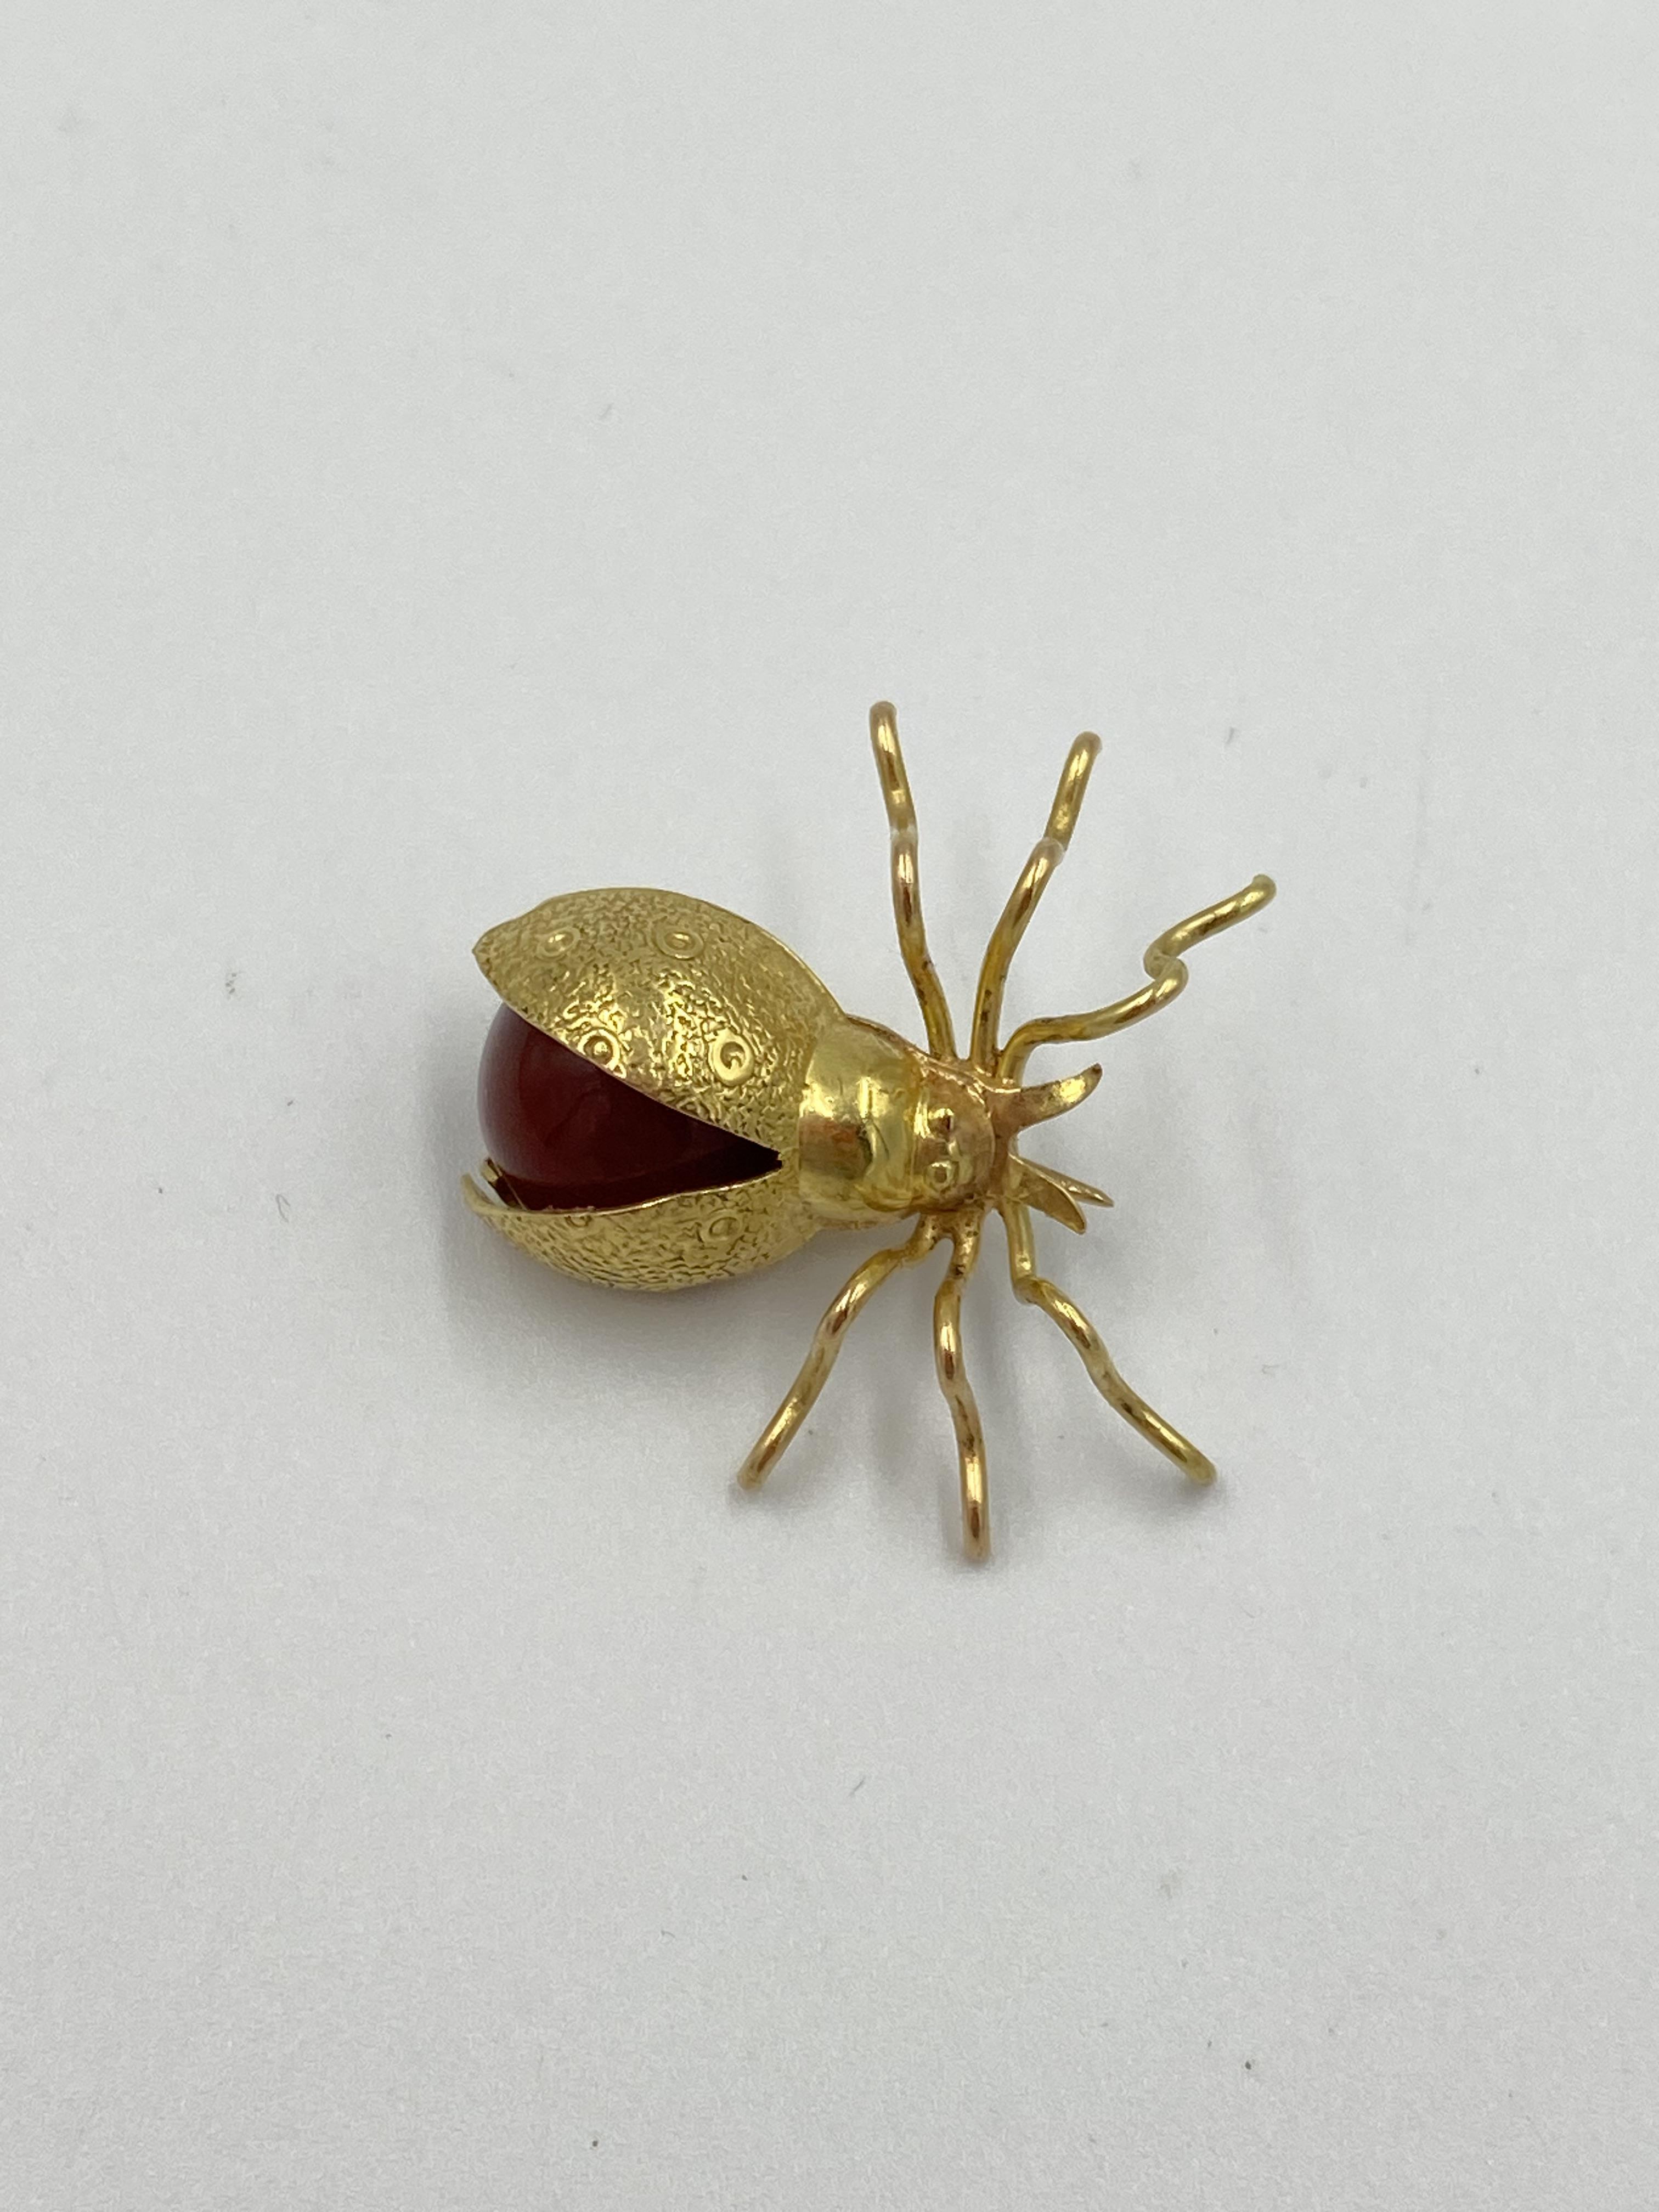 18ct gold spider brooch set with a carnelian cabochon - Image 3 of 4